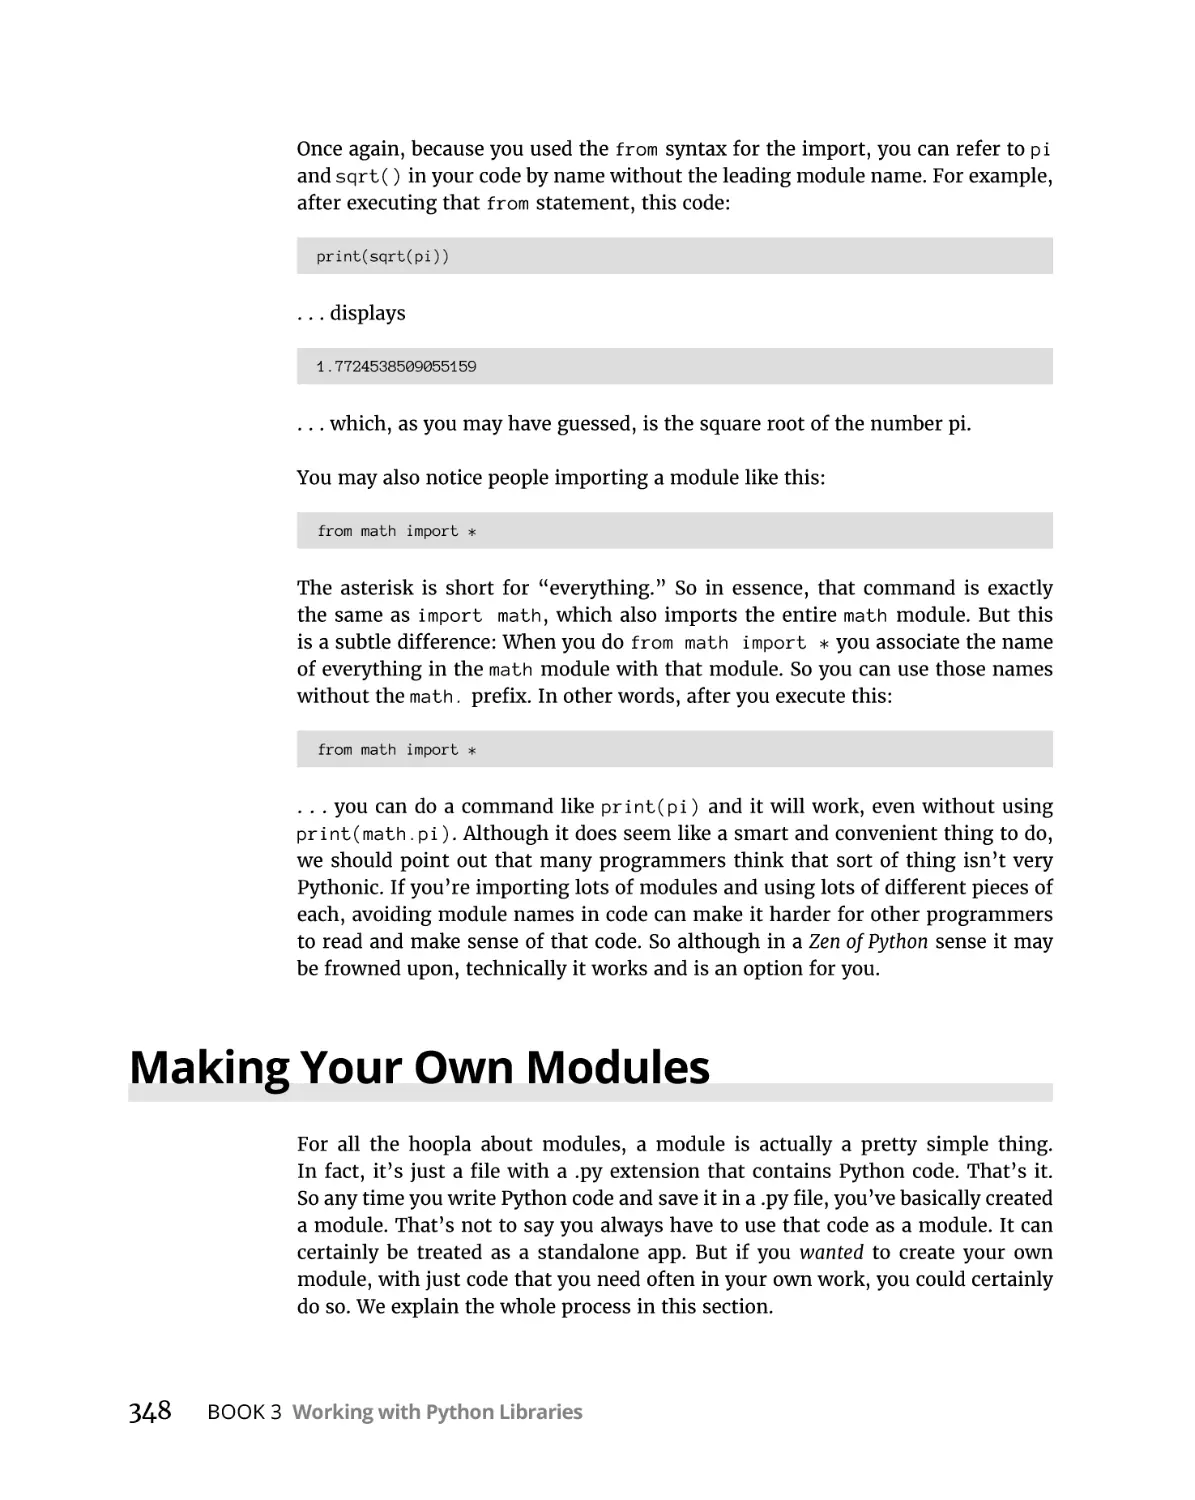 Making Your Own Modules